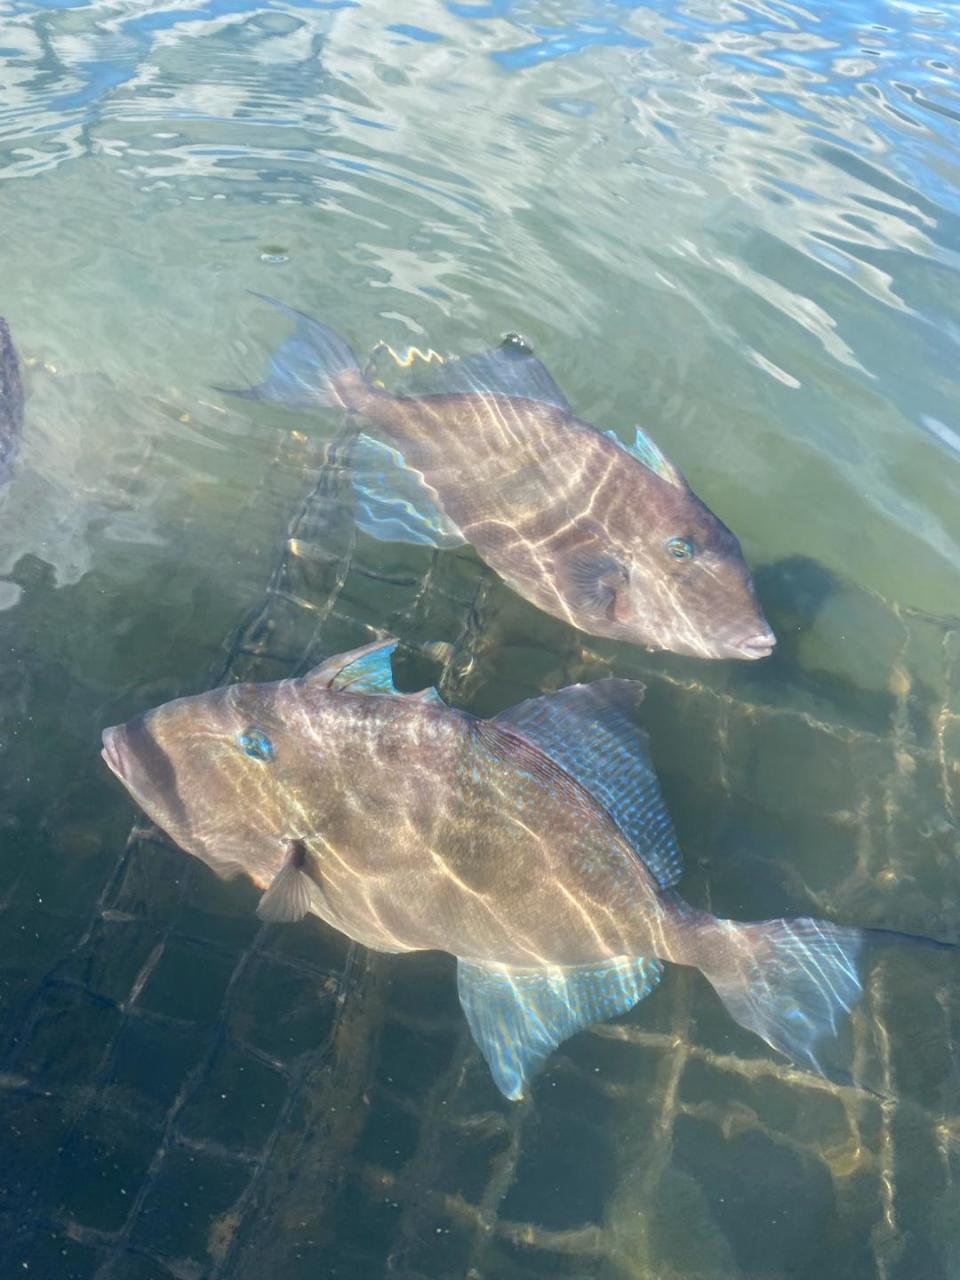 Huge triggerfish, normally in tropical or subtropical waters, shown this week in Quonochontaug (Quonnie) Pond.